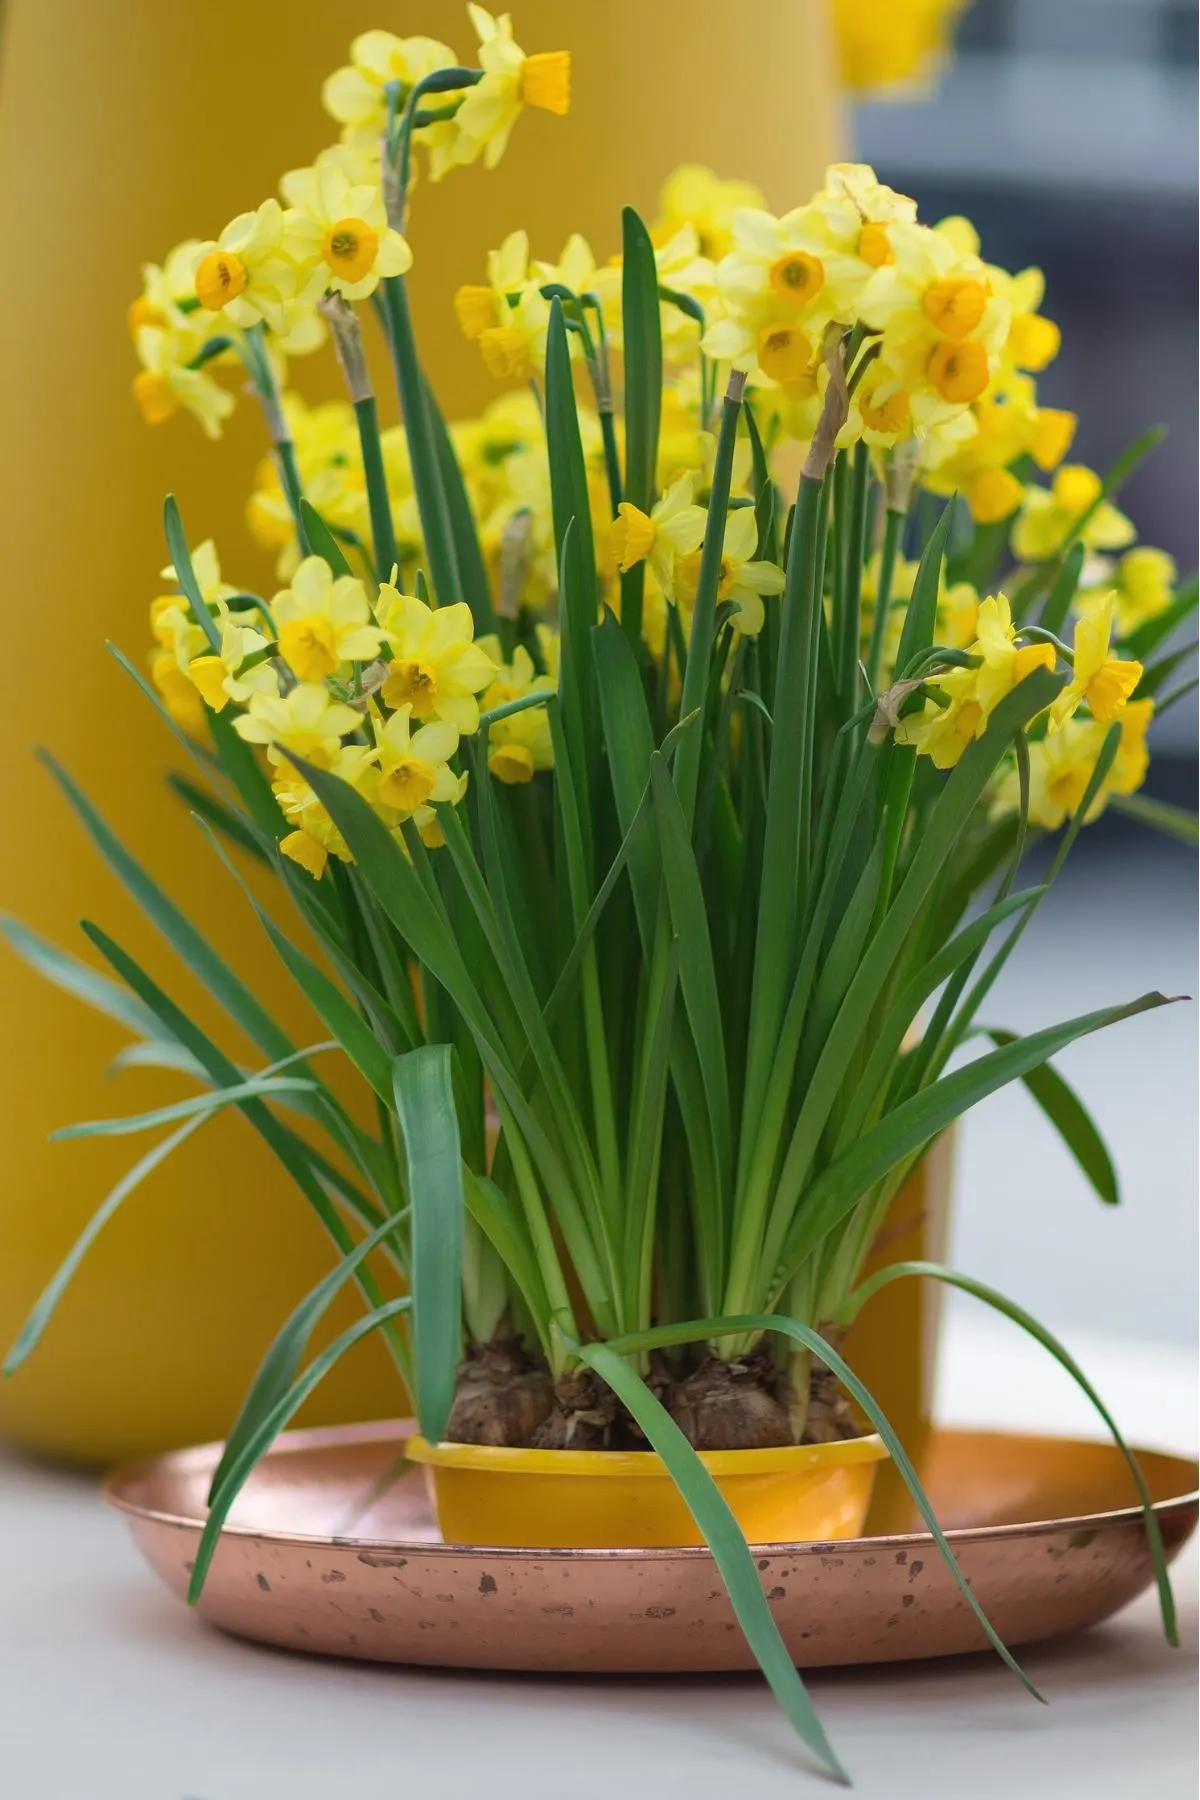 daffodils growing in a container